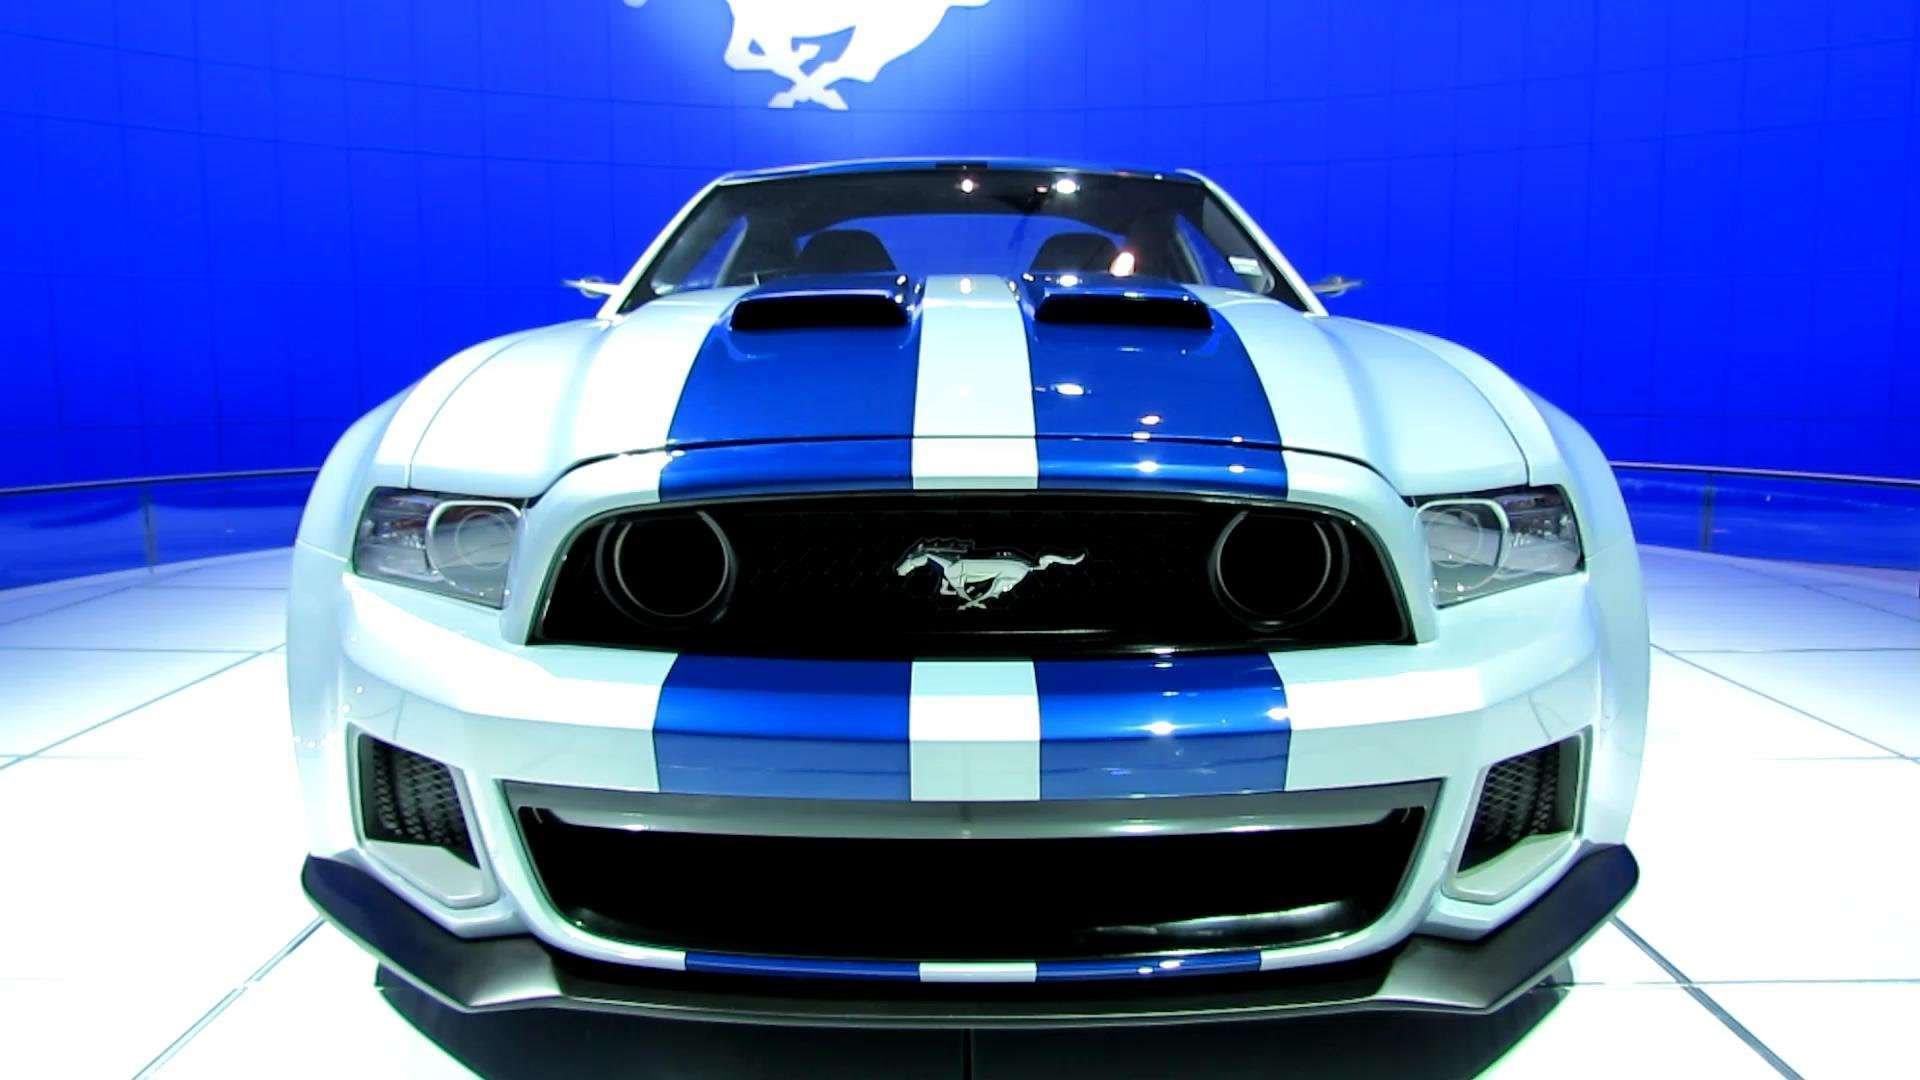 Форд мустанг нфс. Ford Mustang gt 2014. Ford Mustang gt 500 NFS. Ford Mustang Shelby gt500 NFS. Ford Shelby gt500 Speed.